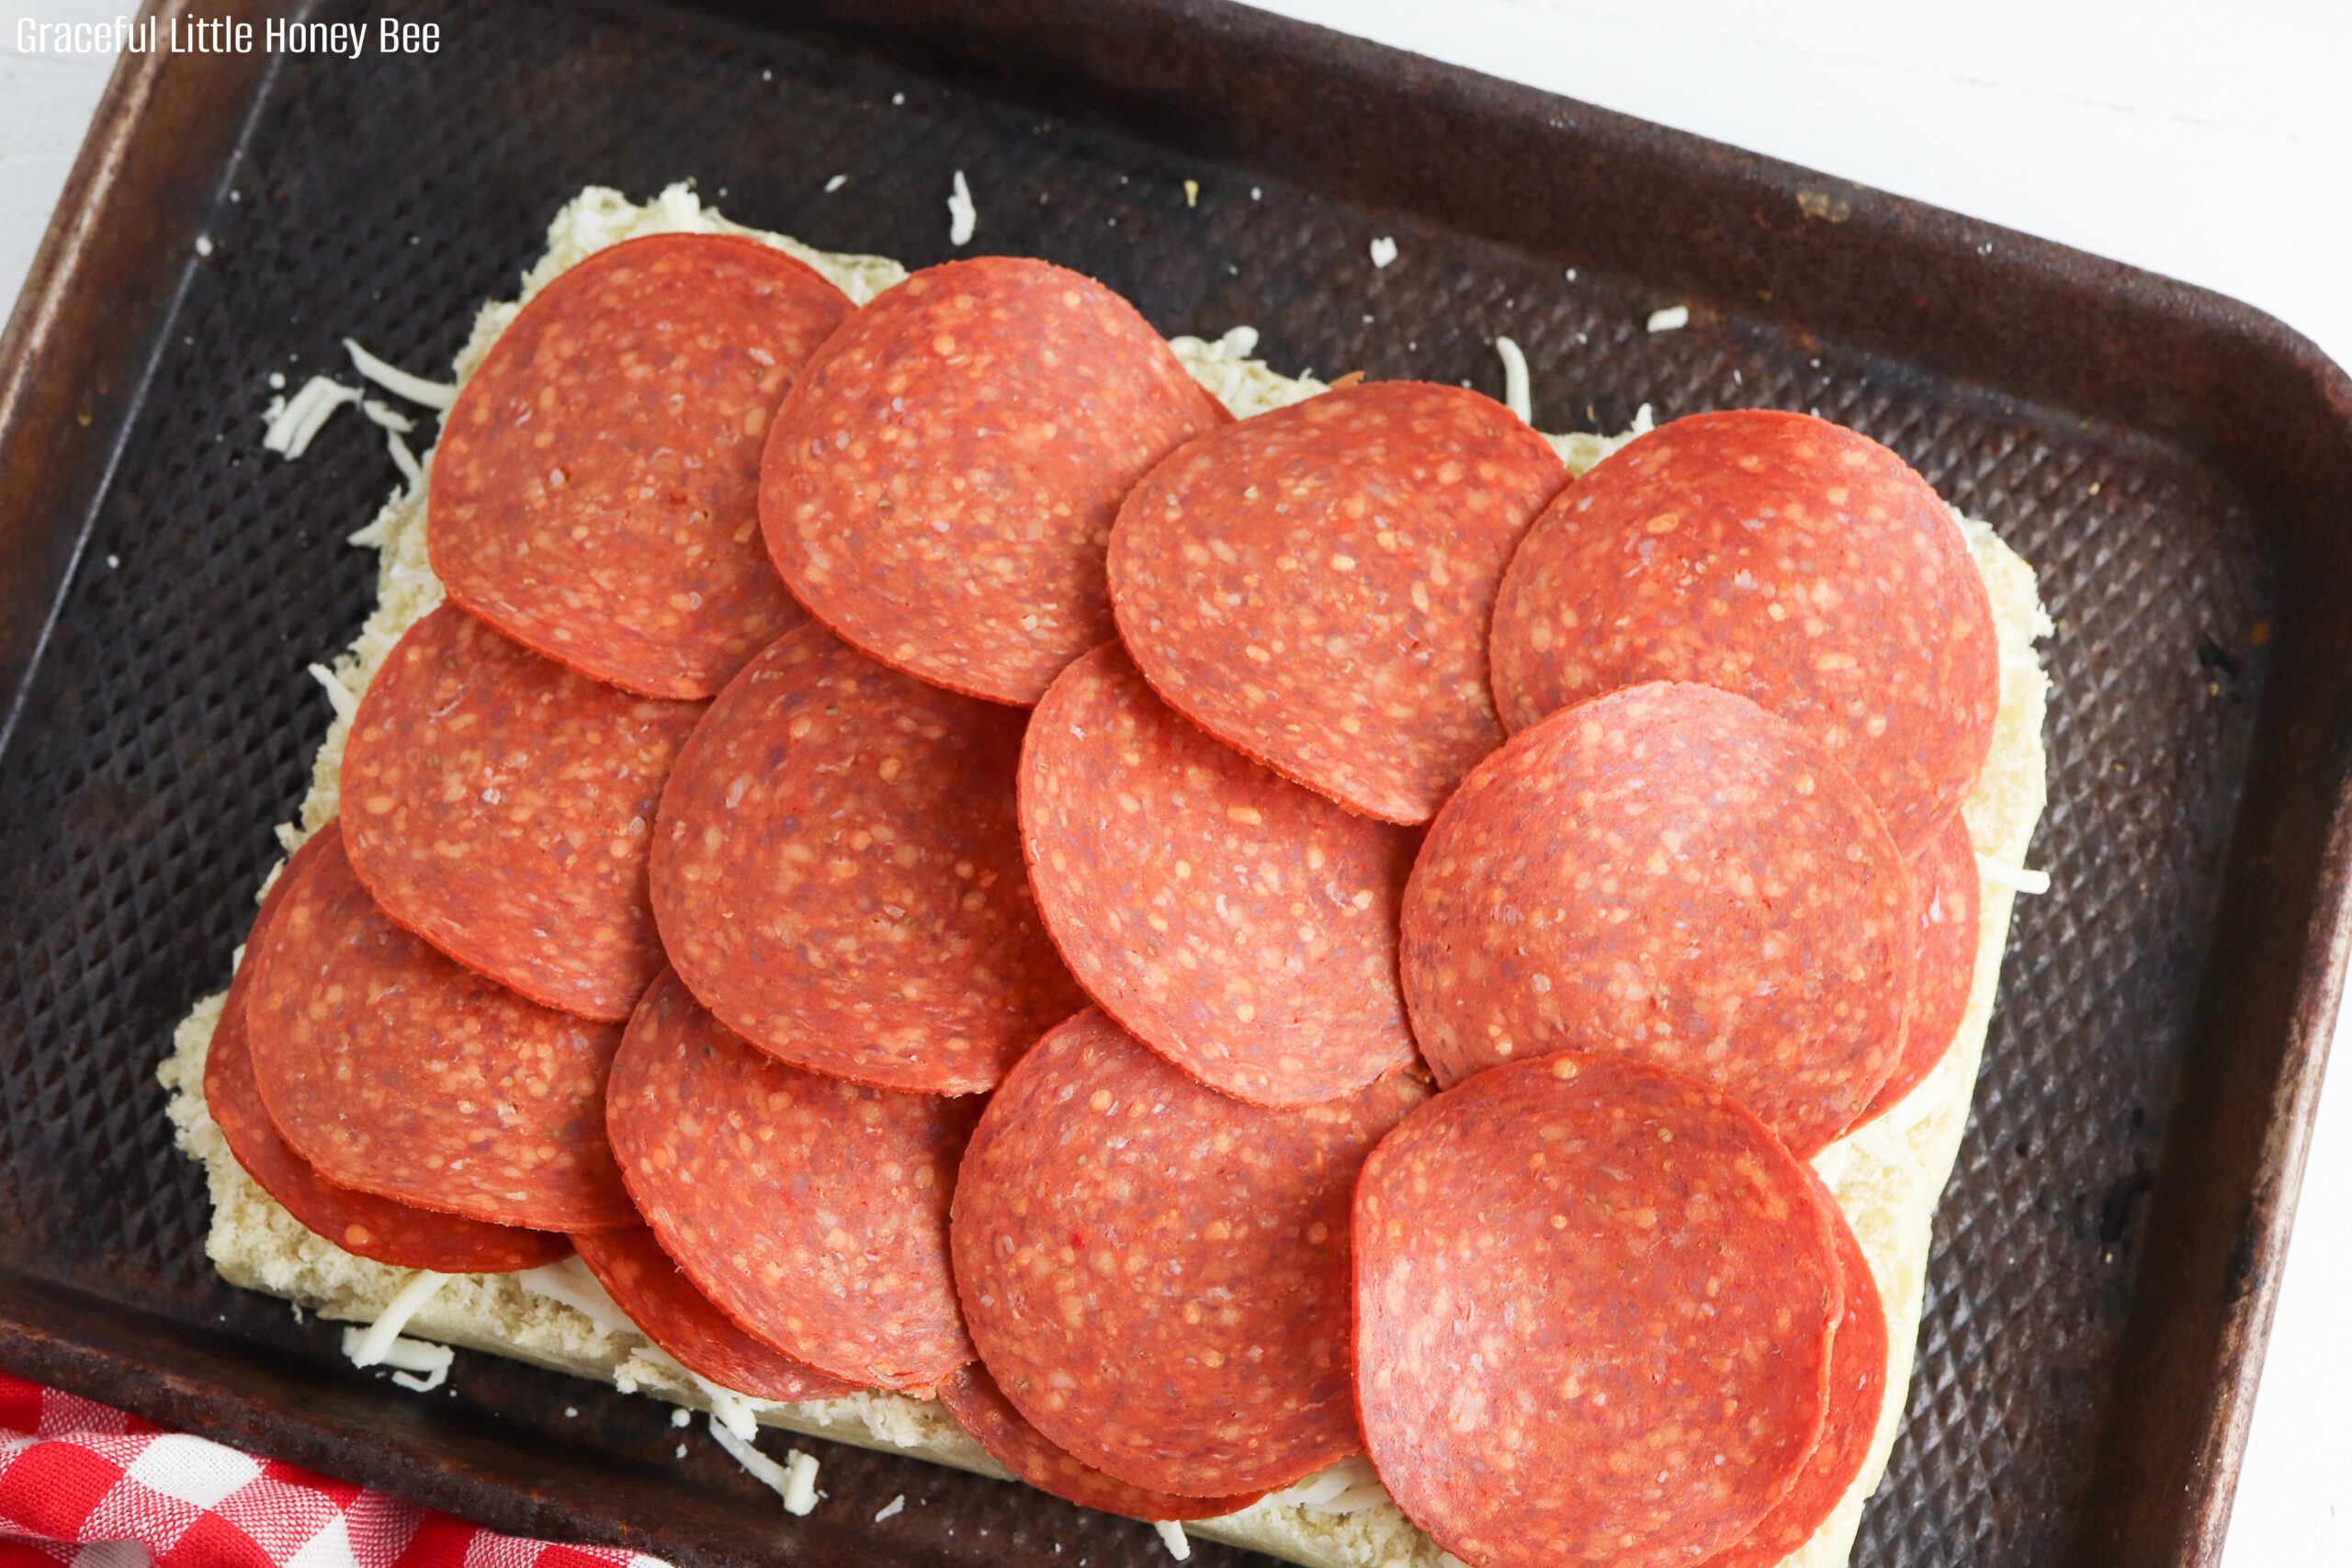 Bottom slab of rolls sitting on a baking sheet sprinkled with mozzarella cheese and a layer of pepperoni slices.